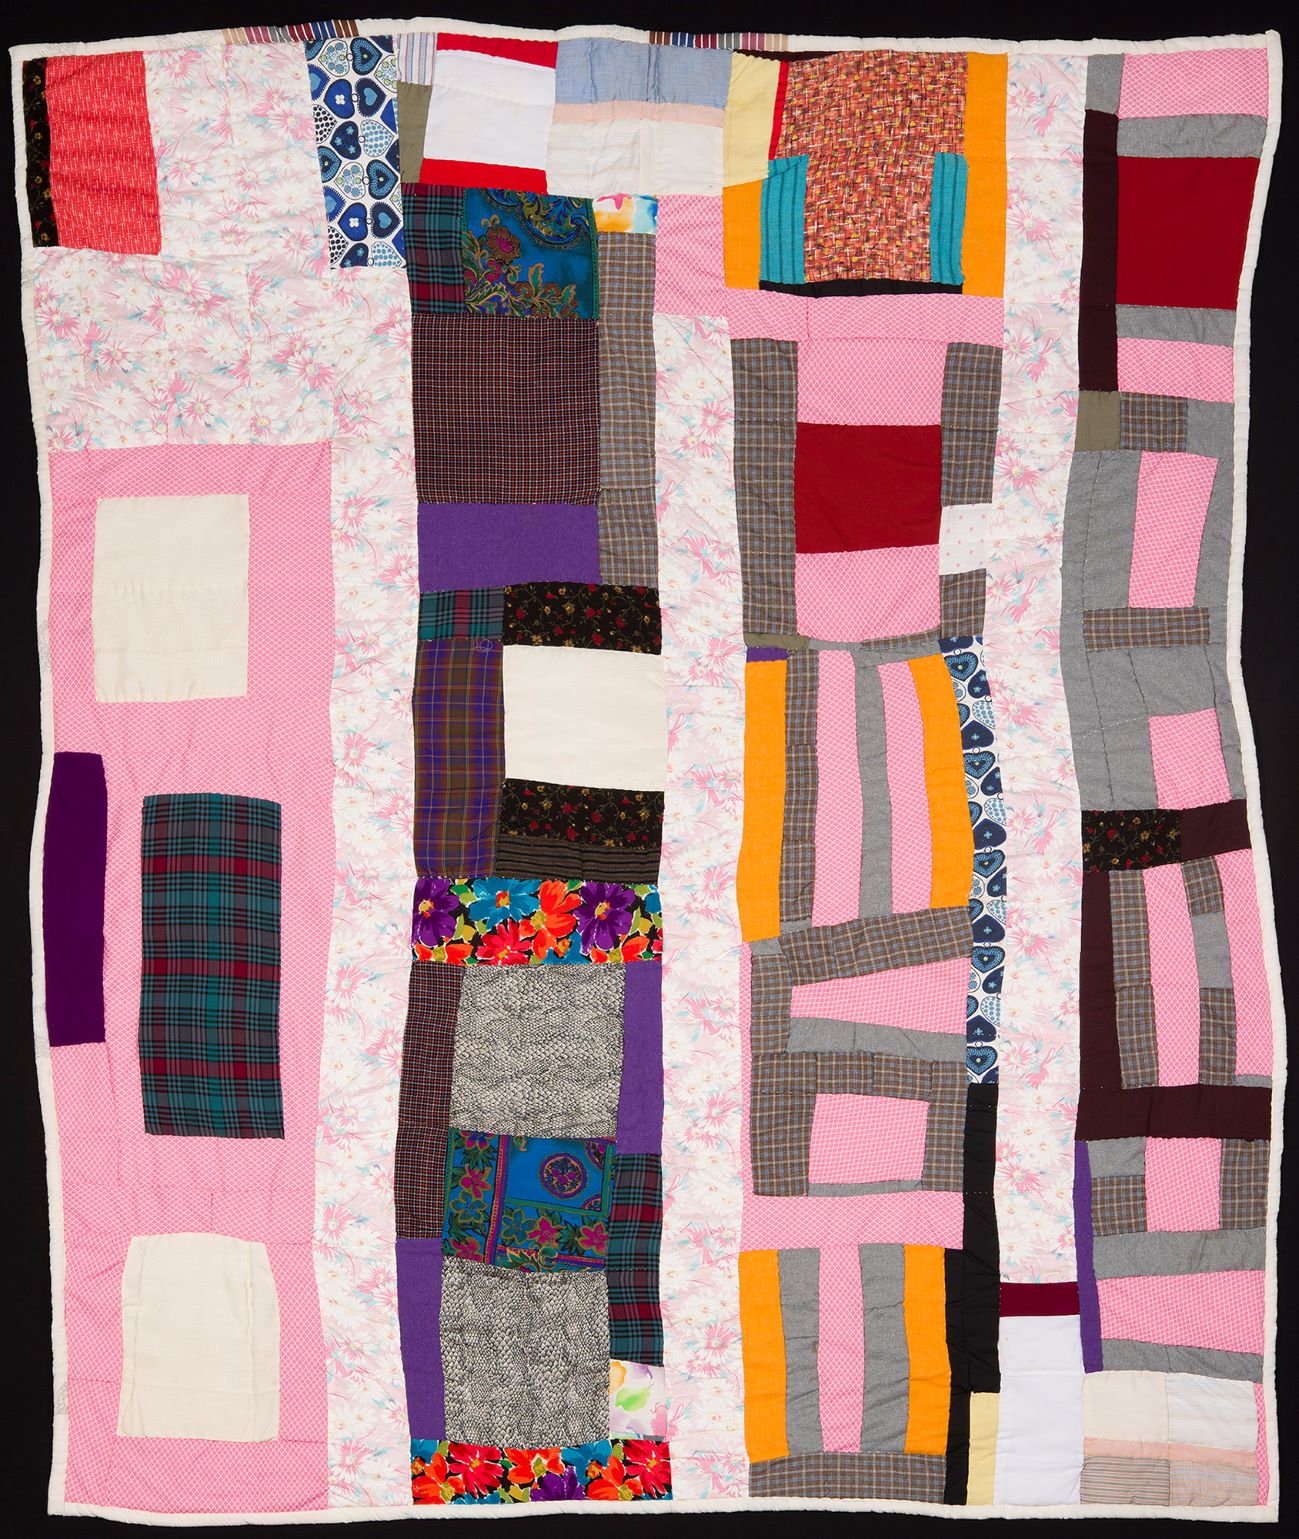 Photograph of multicolor quilt by Irene Williams